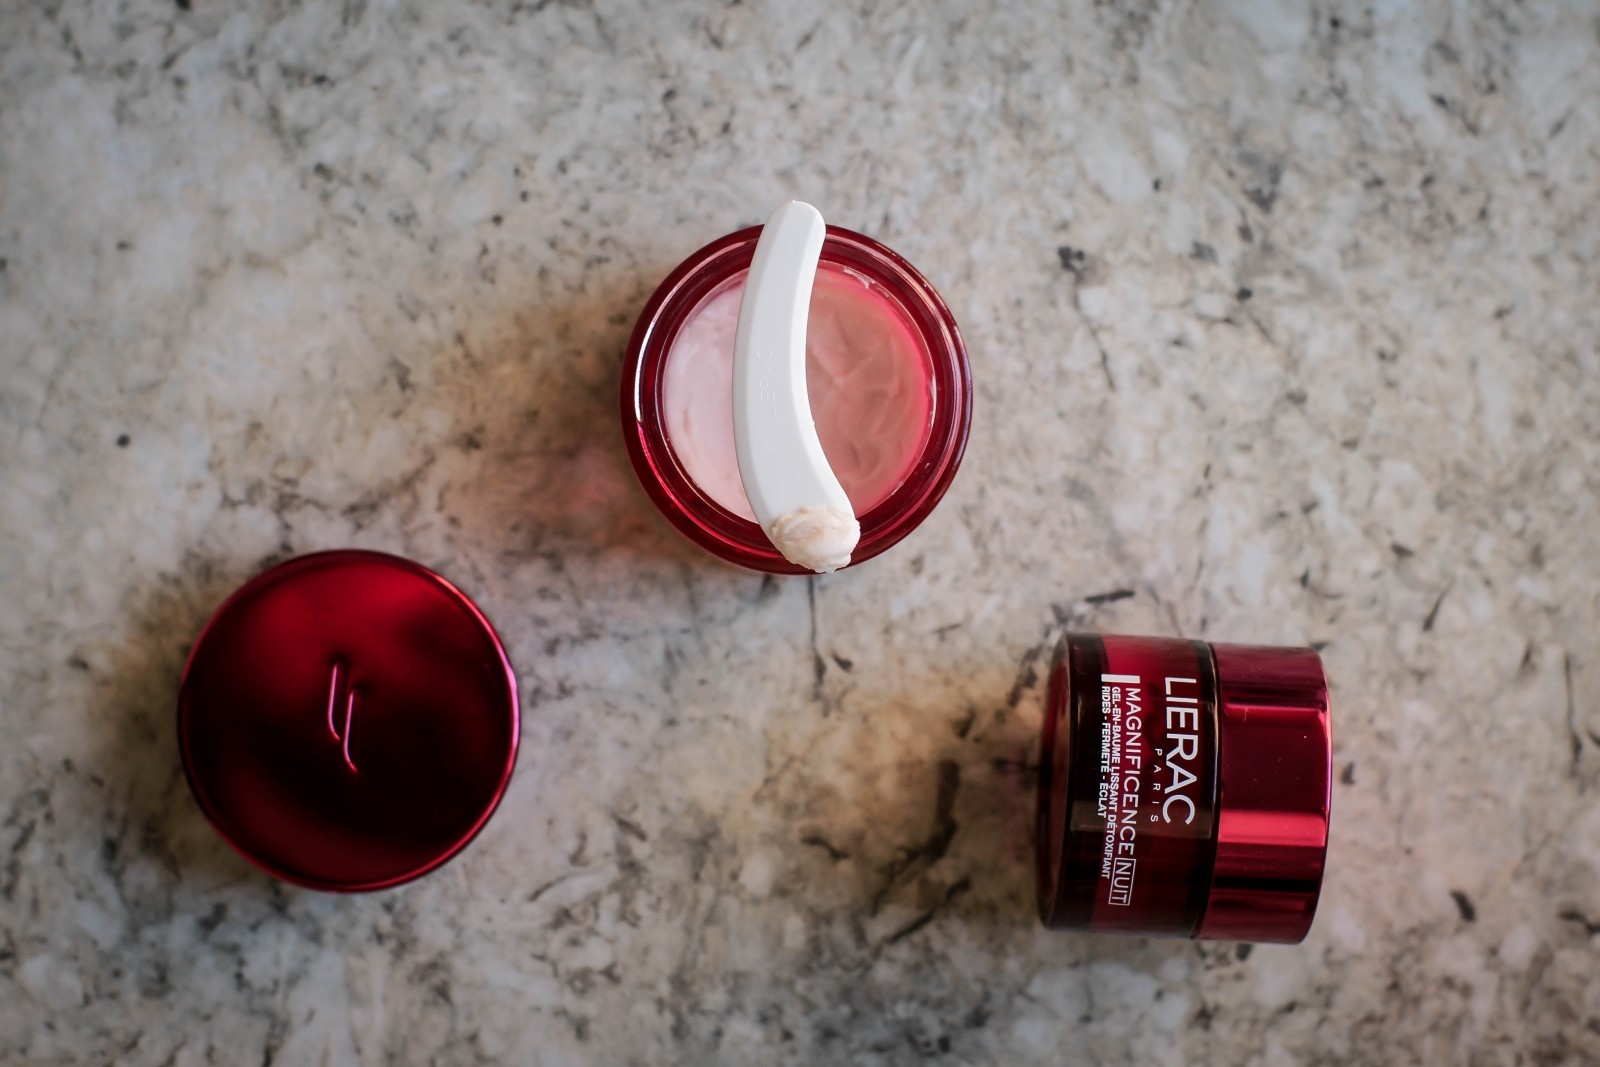 Lierac Magnificence Night Cream Review